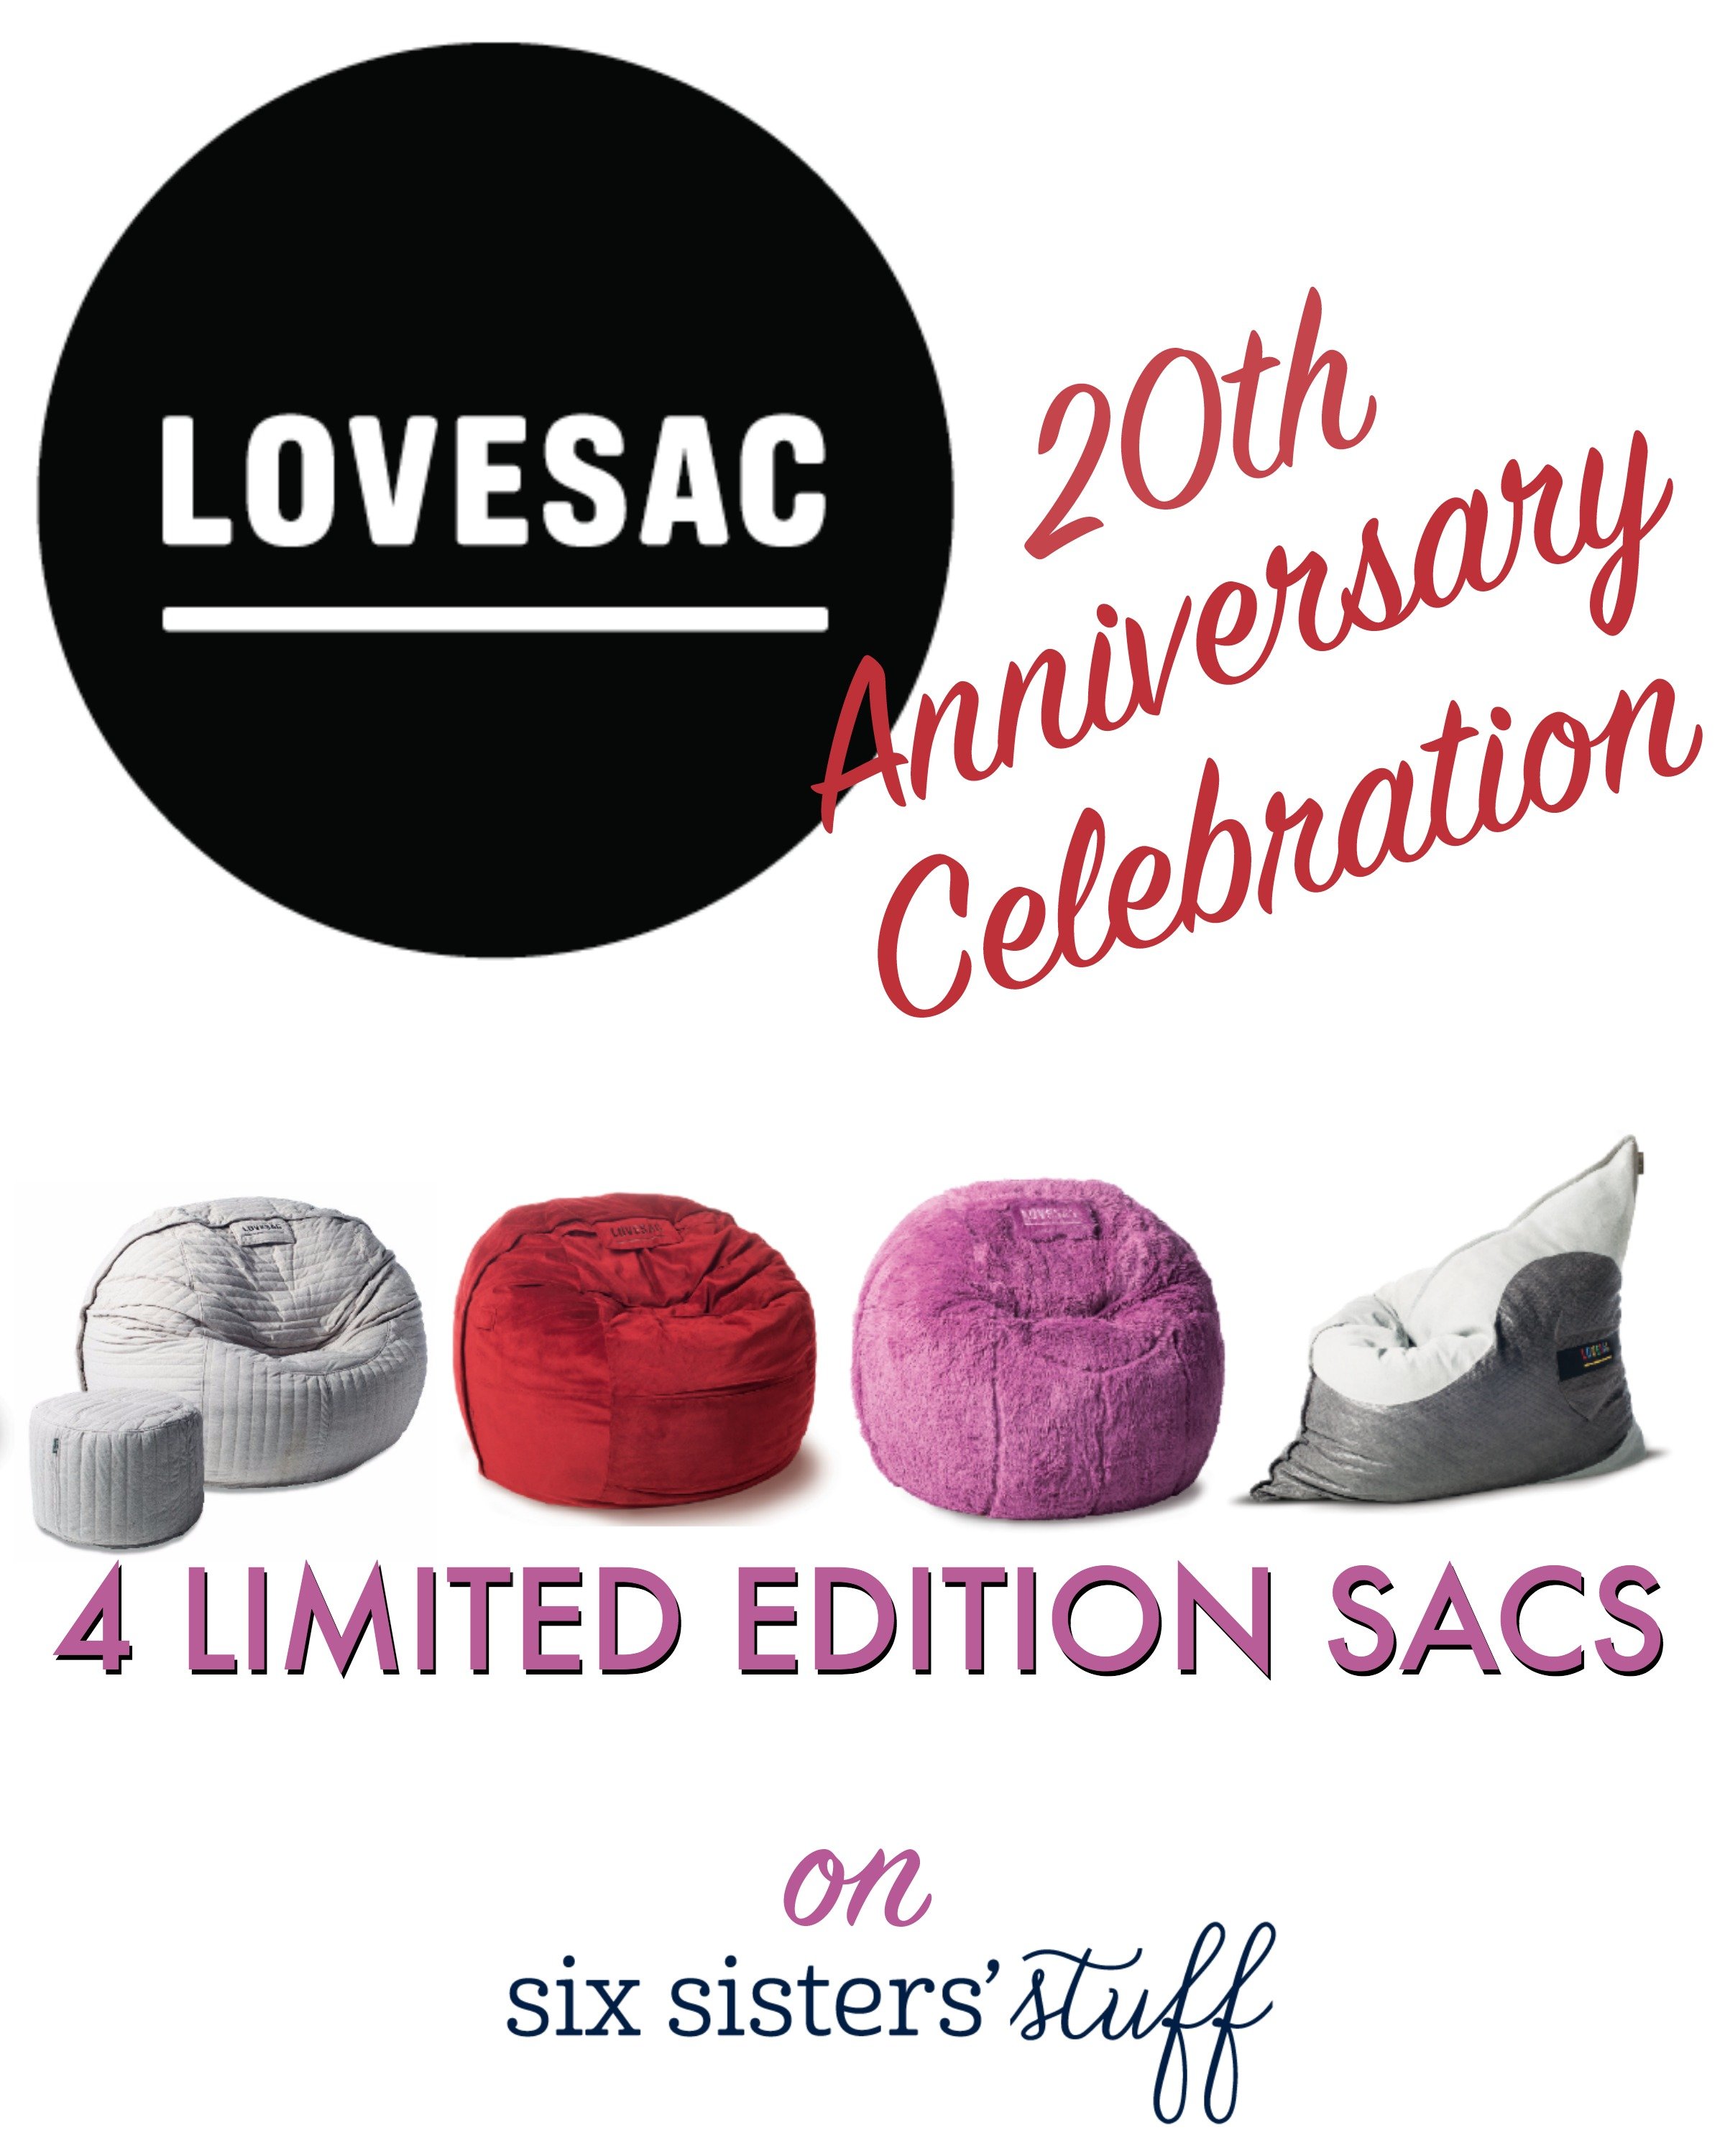 Lovesac 20th Anniversary Limited Edition Roots Collection & a Lovesac Giveaway (worth $1300!)